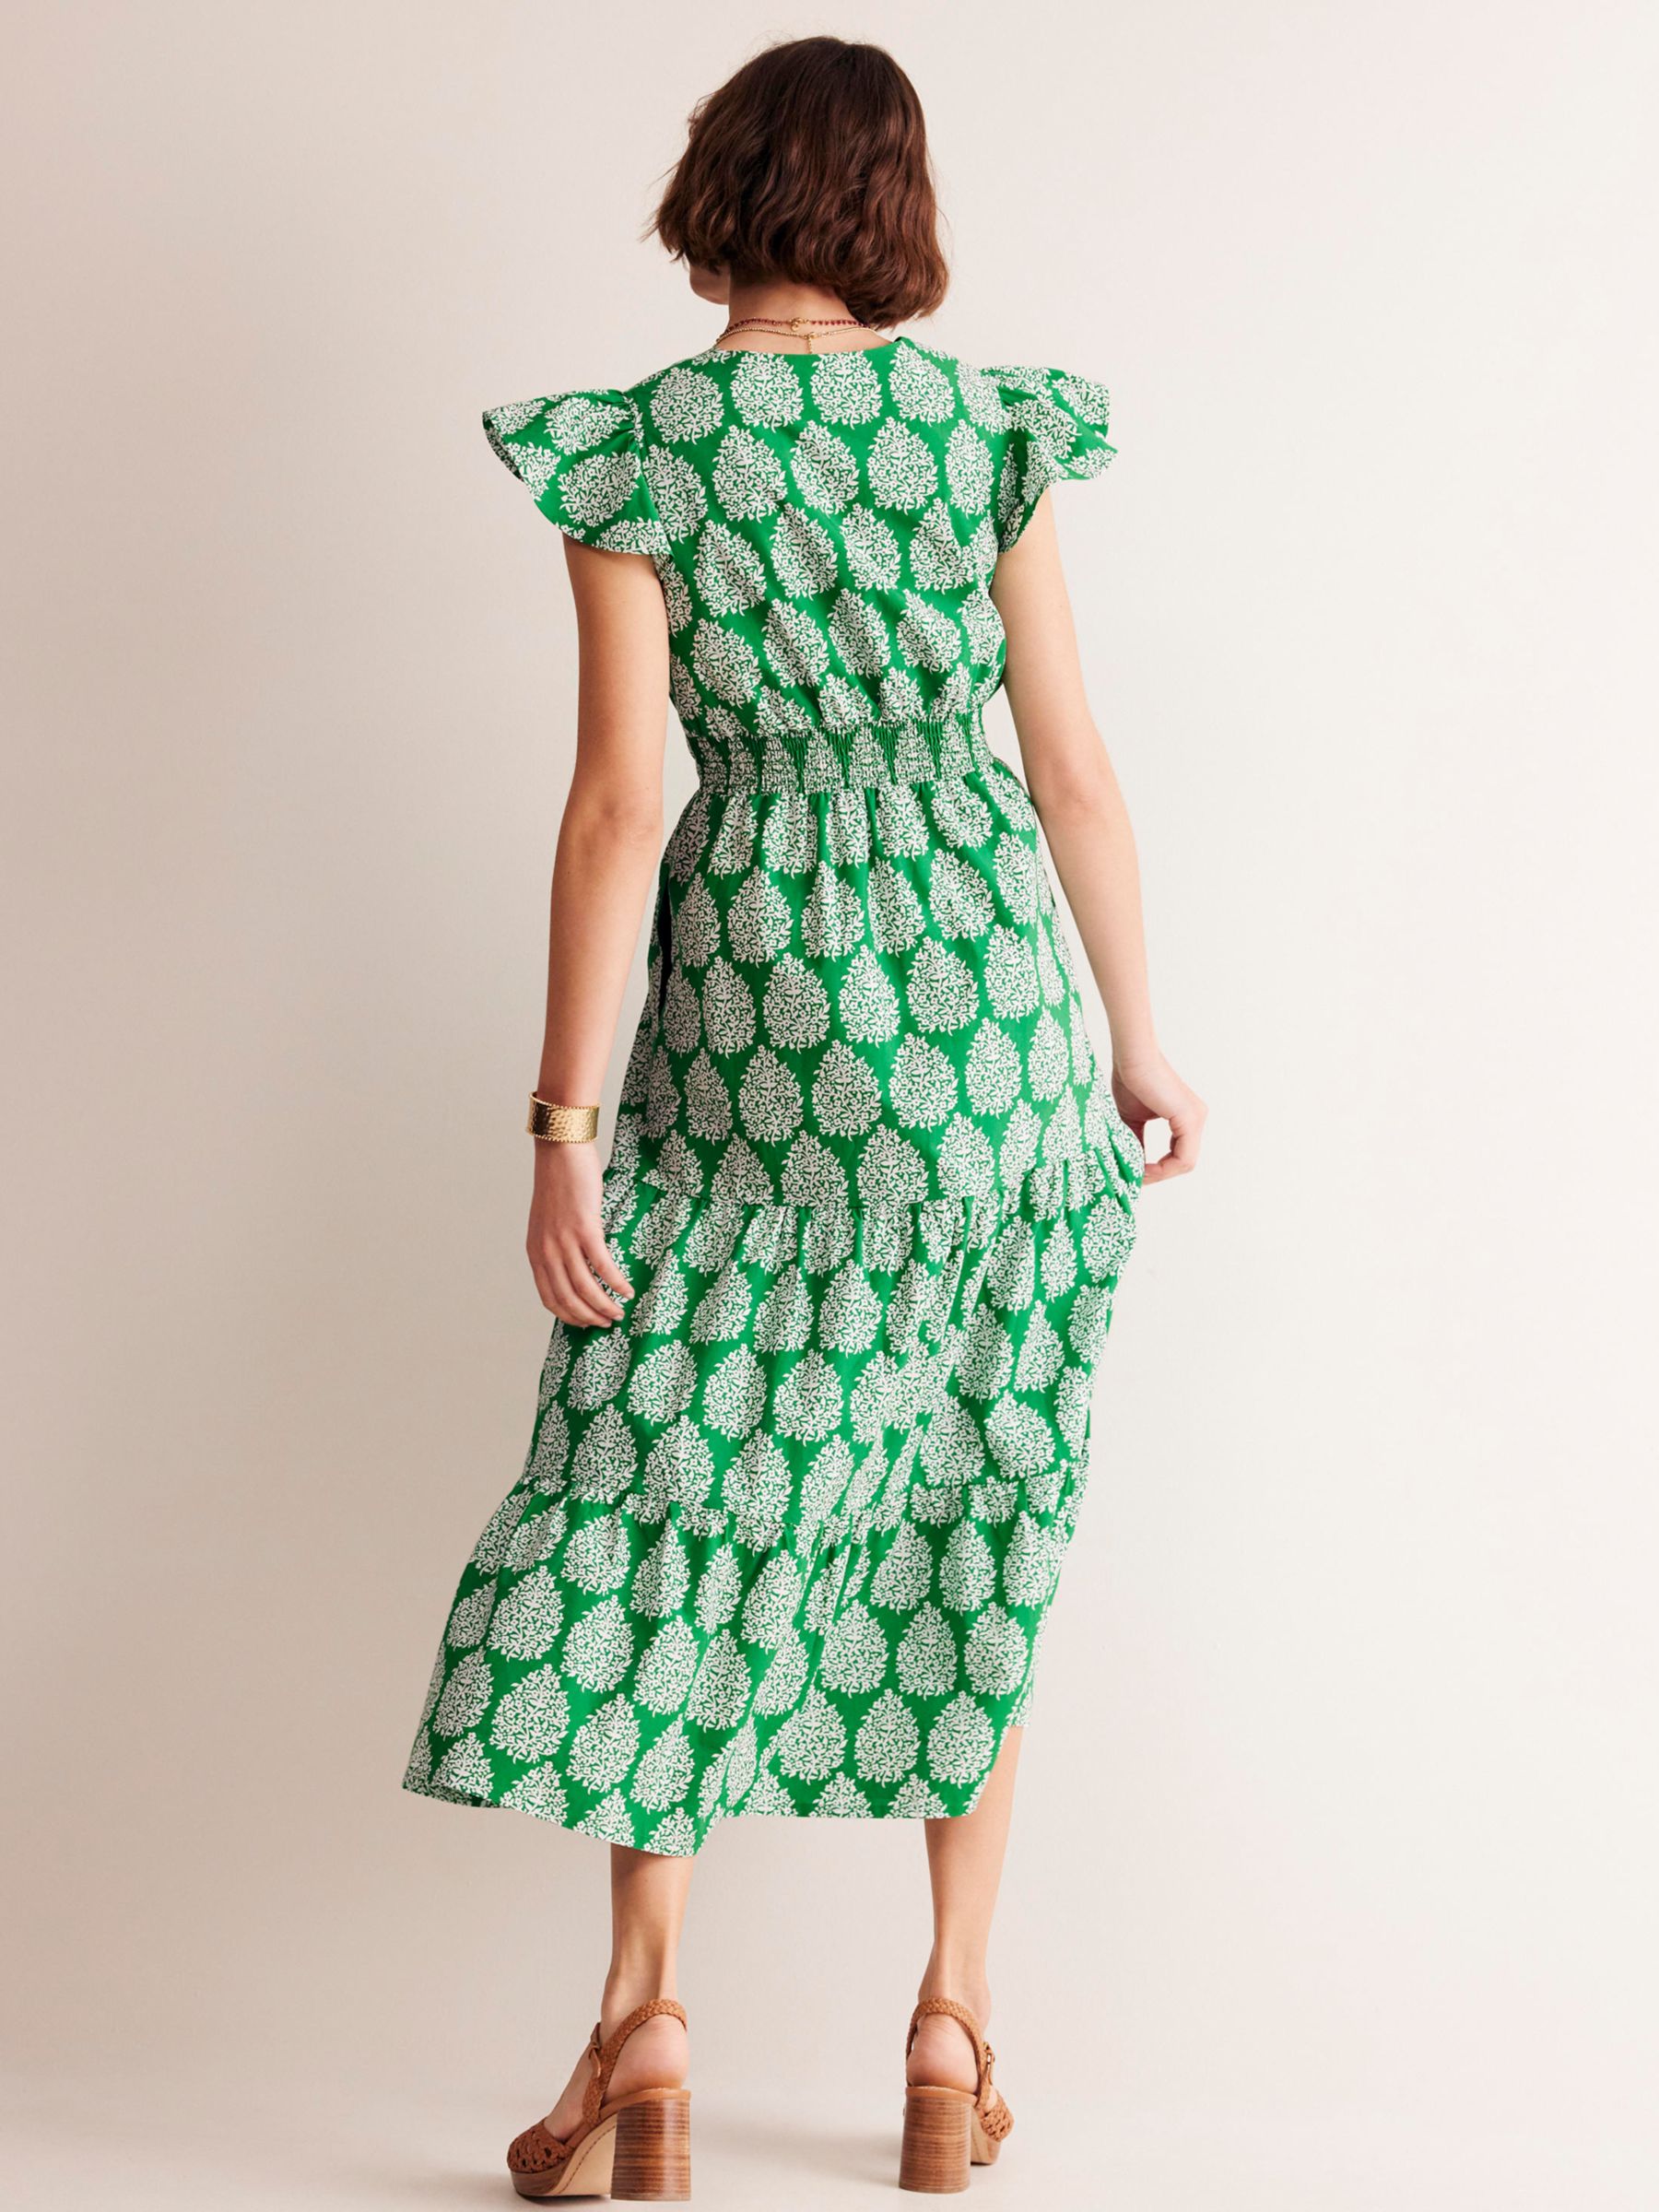 Boden May Floret Print Tiered Cotton Midi Dress, Green/White, 8